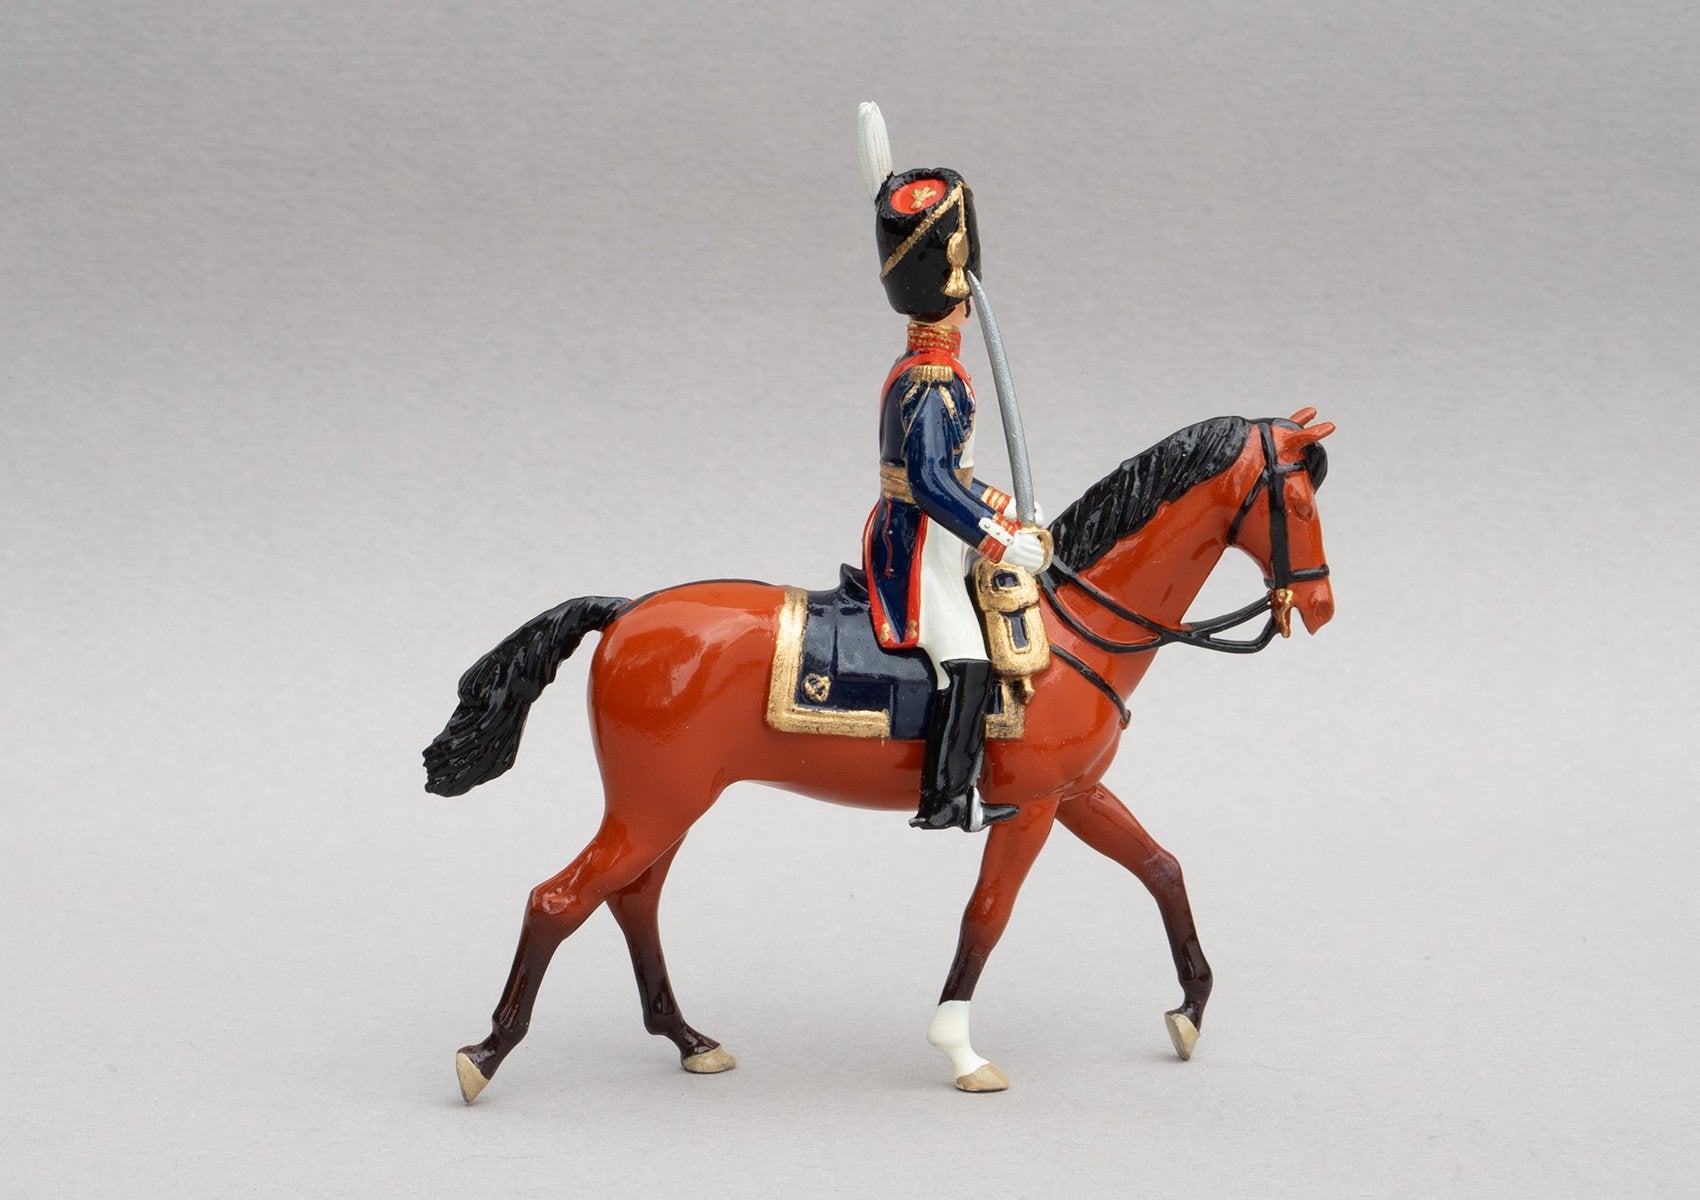 Set 108 General Dorsenne | French Infantry | Napoleonic Wars | French military commander of the Revolutionary and Napoleonic wars. Dressed in the uniform of the Grenadiers of the Guard.  Single mounted officer on chestnut horse | Waterloo | © Imperial Productions | Sculpt by David Cowe